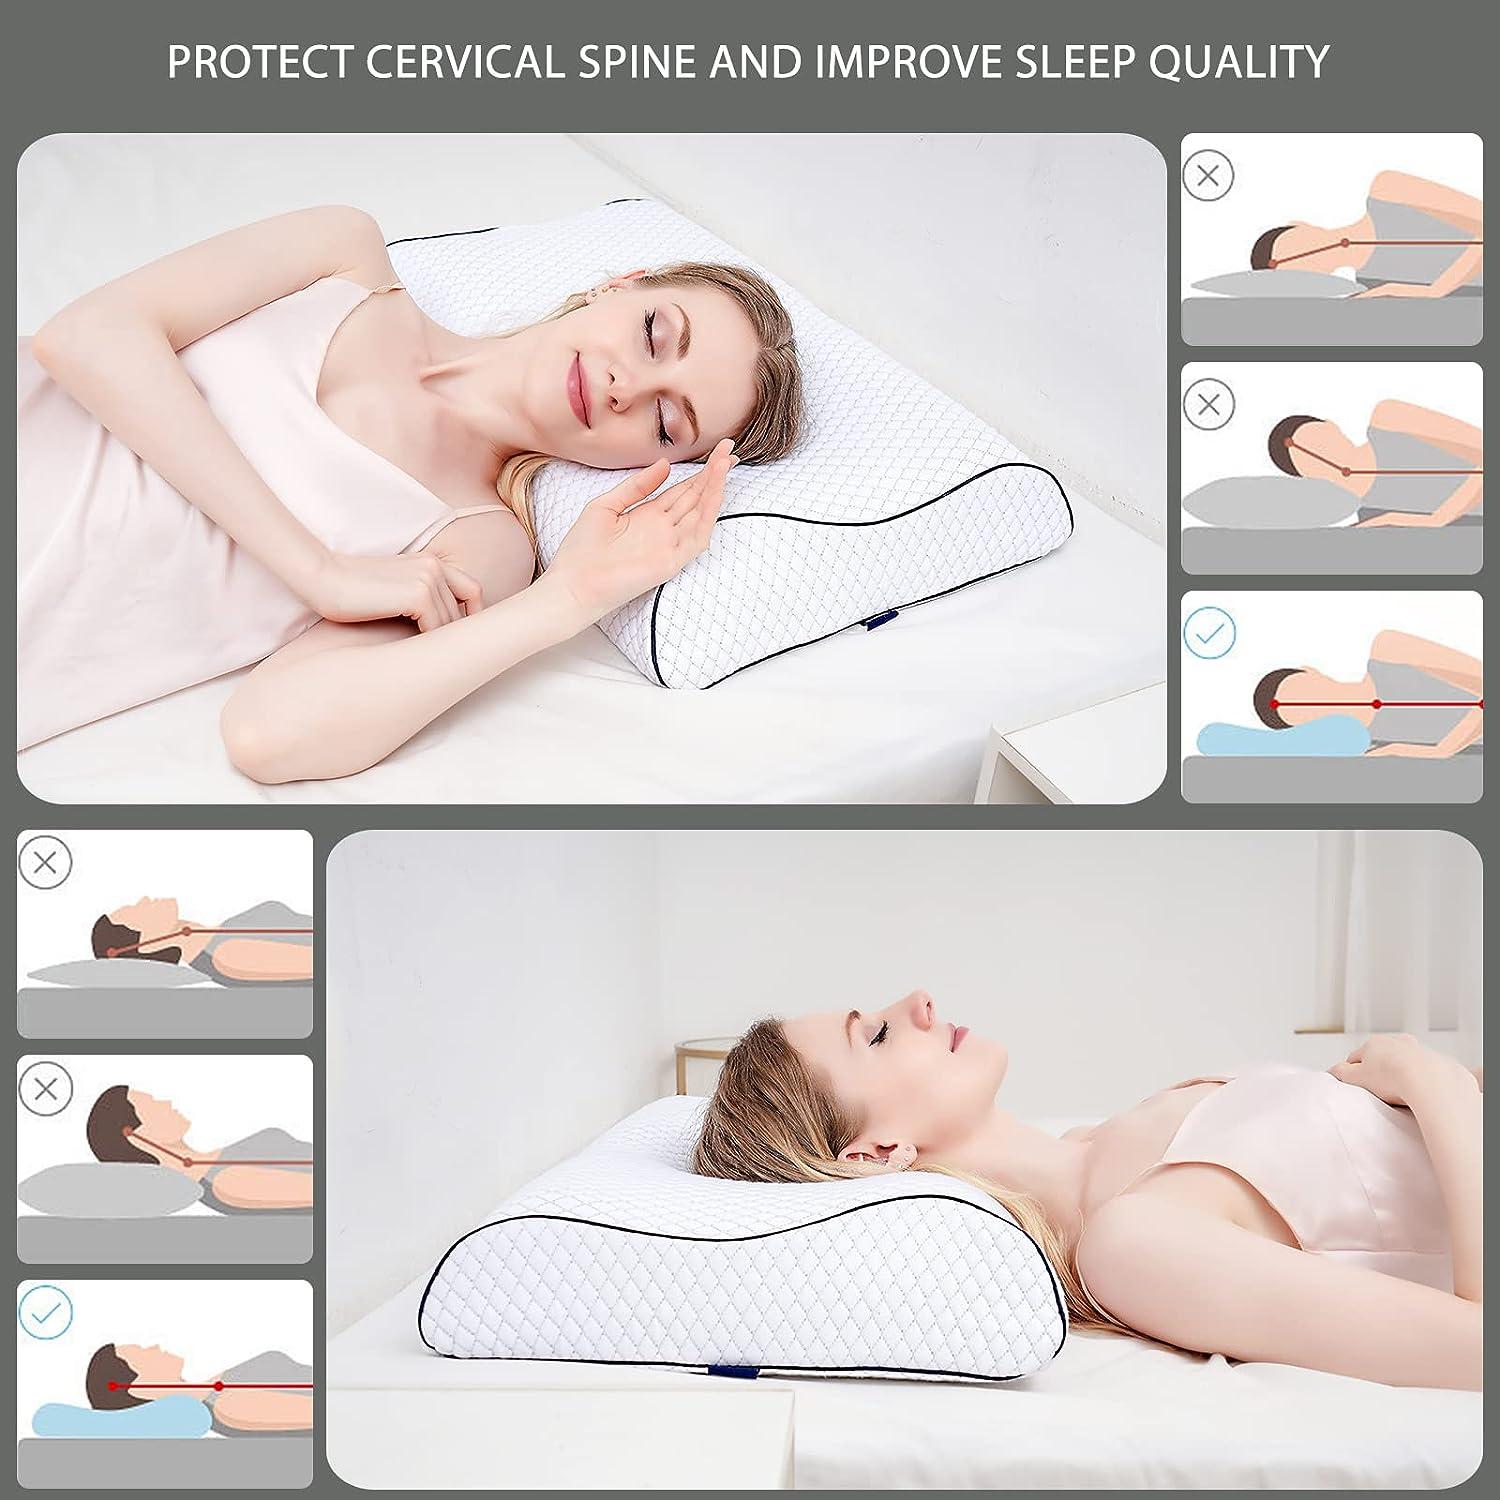 Cervical Contour Memory Foam Pillow: Neck Support Bed Pillow,Ergonomic  Orthopedic Sleep Spine Contoured Pillows,Relief Neck Shoulder Back Pain  Pain Relief Snoring, Side Back Stomach Sleeper Pillow : : Home